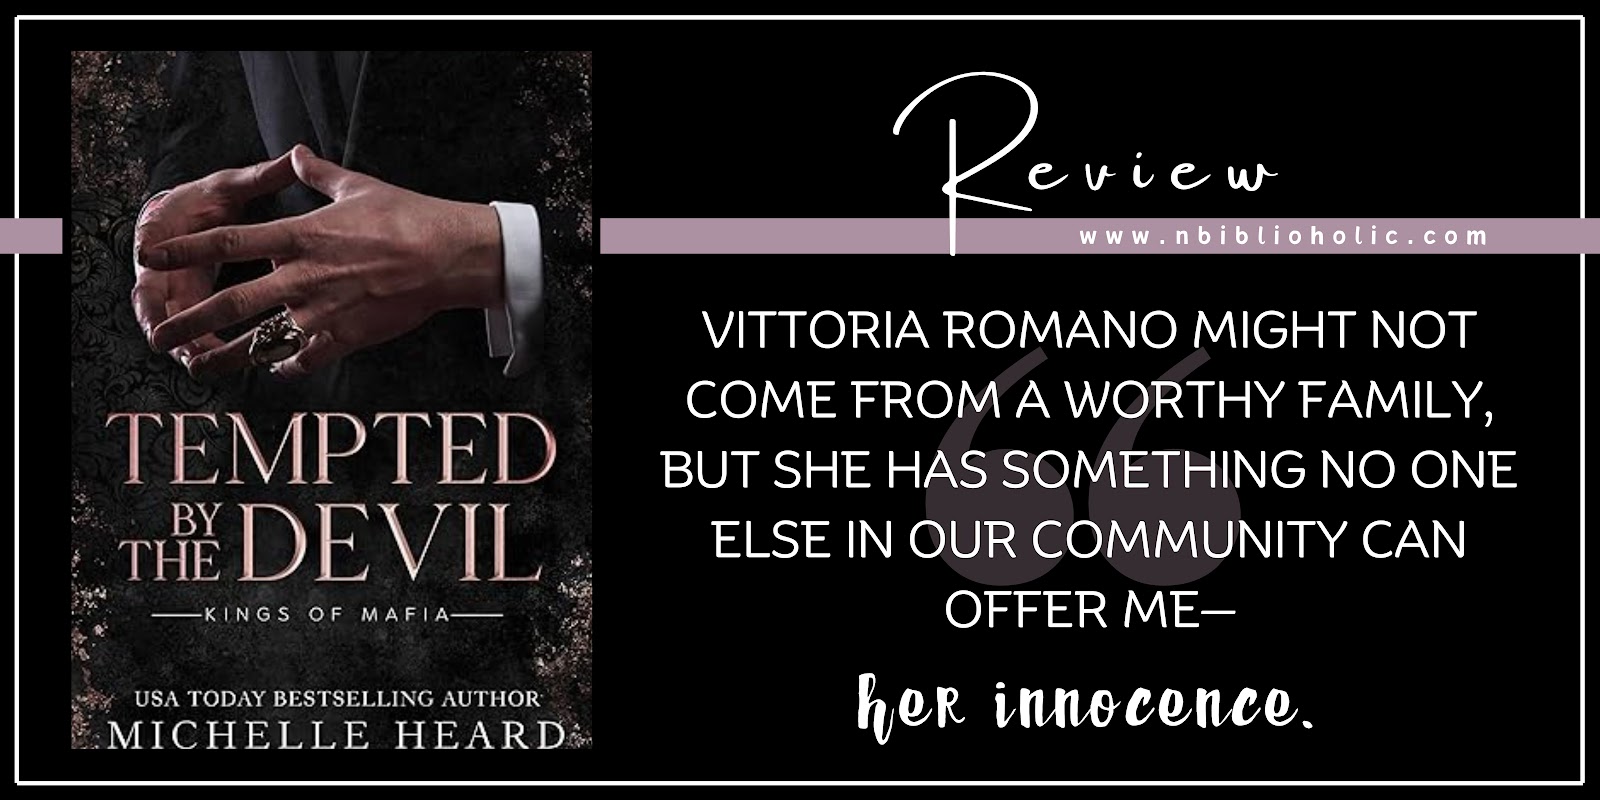 Tempted by the Devil by Michelle Heard